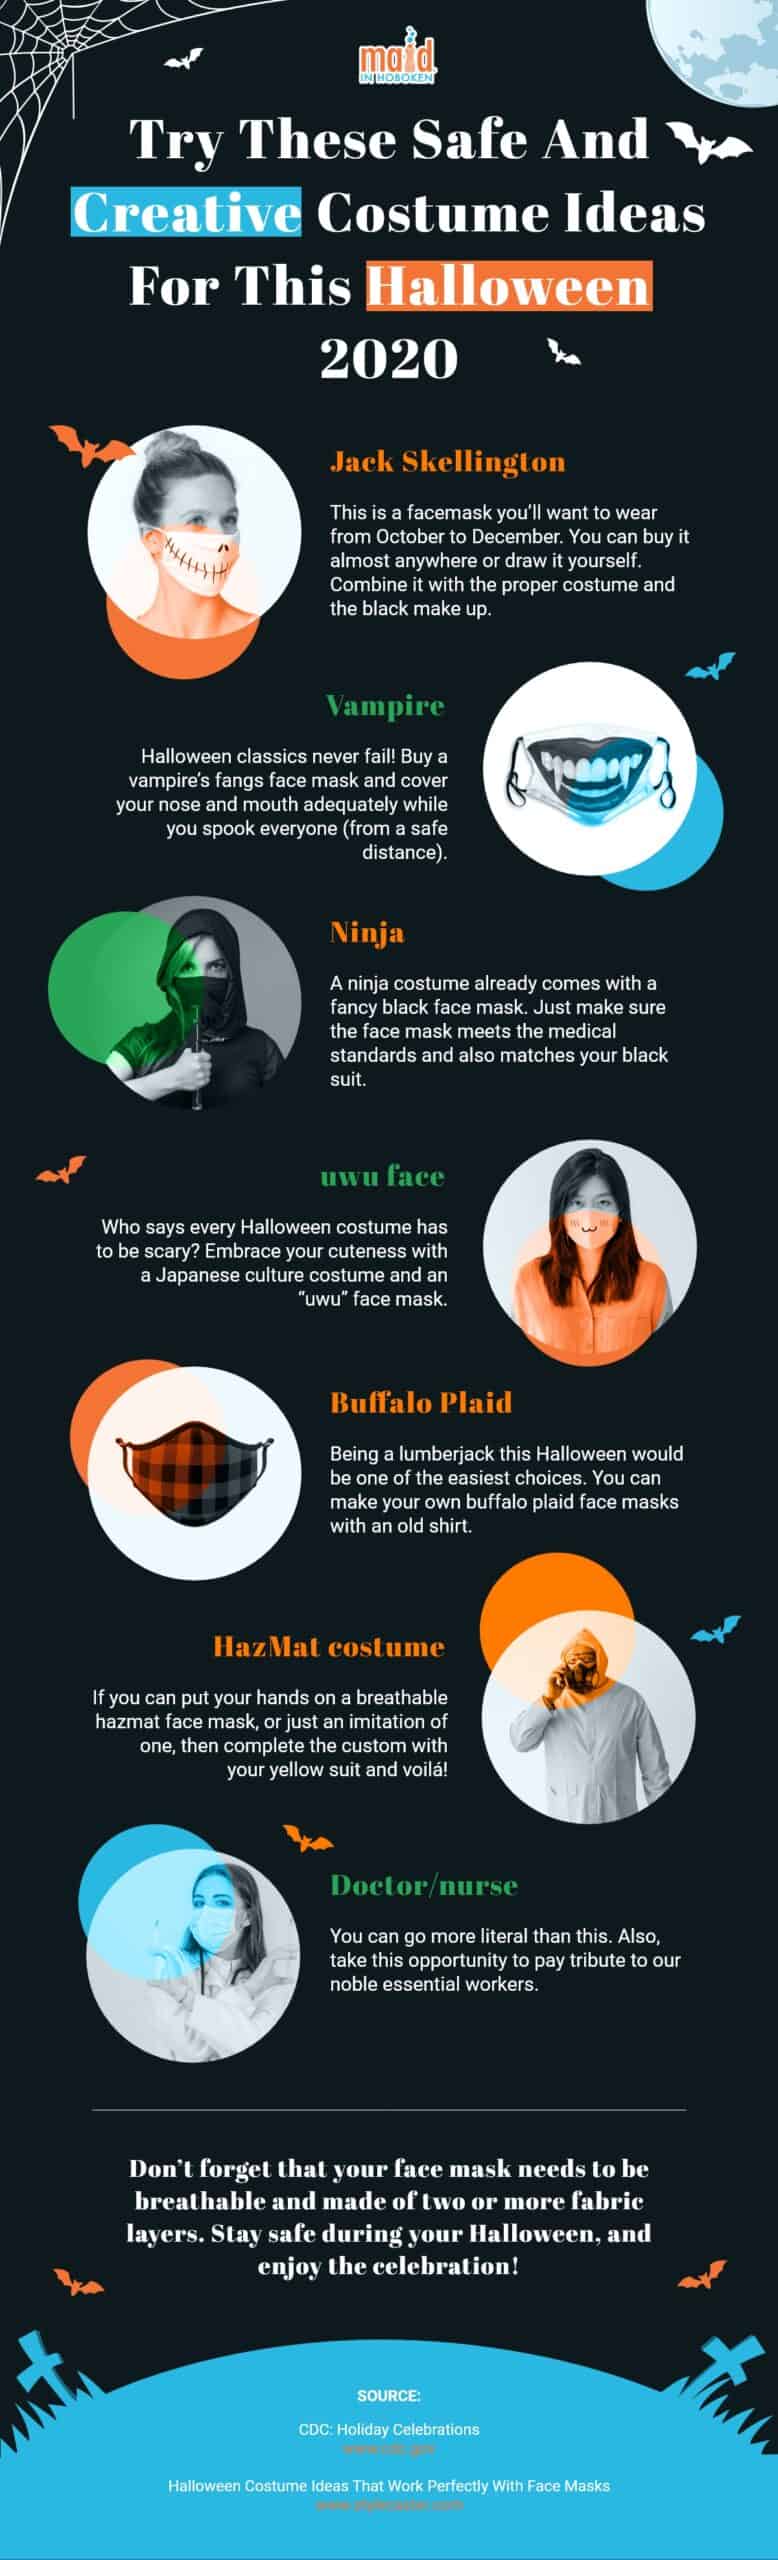 Try These Safe And Creative Costume Ideas For This Halloween 2020